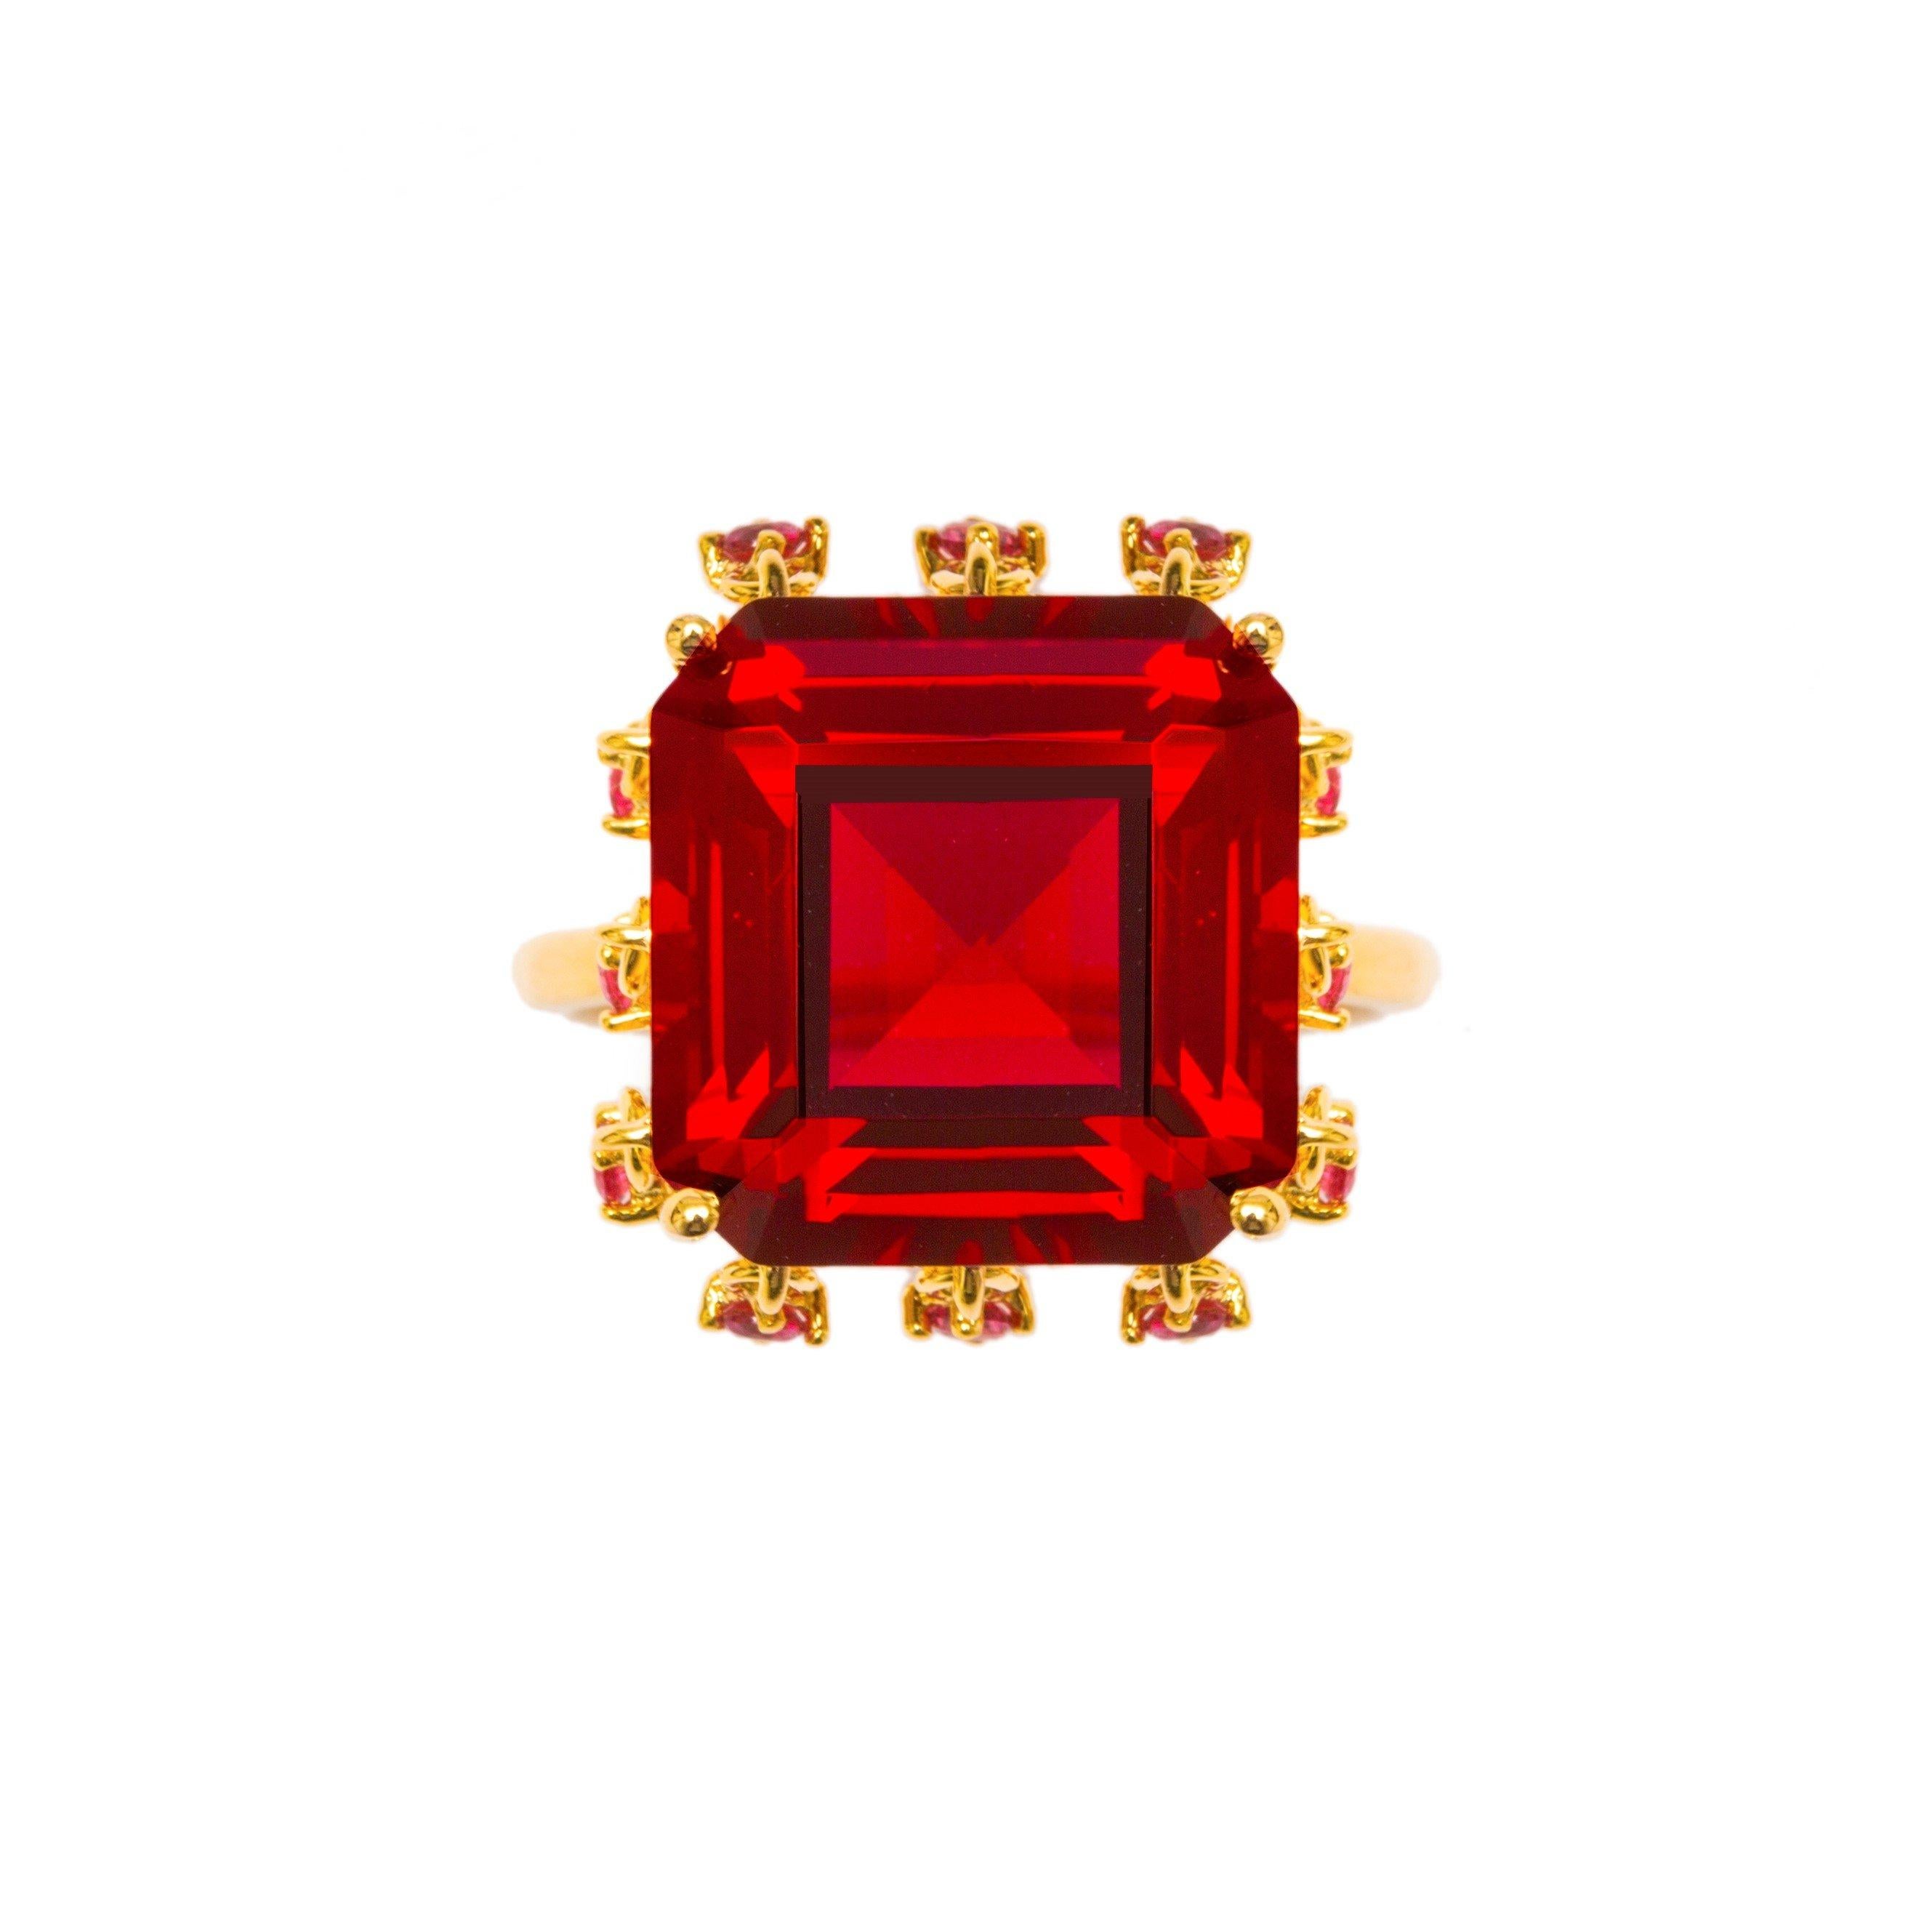 Ammanii Red Garnet Cocktail Ring with Charms Vermeil Gold 2